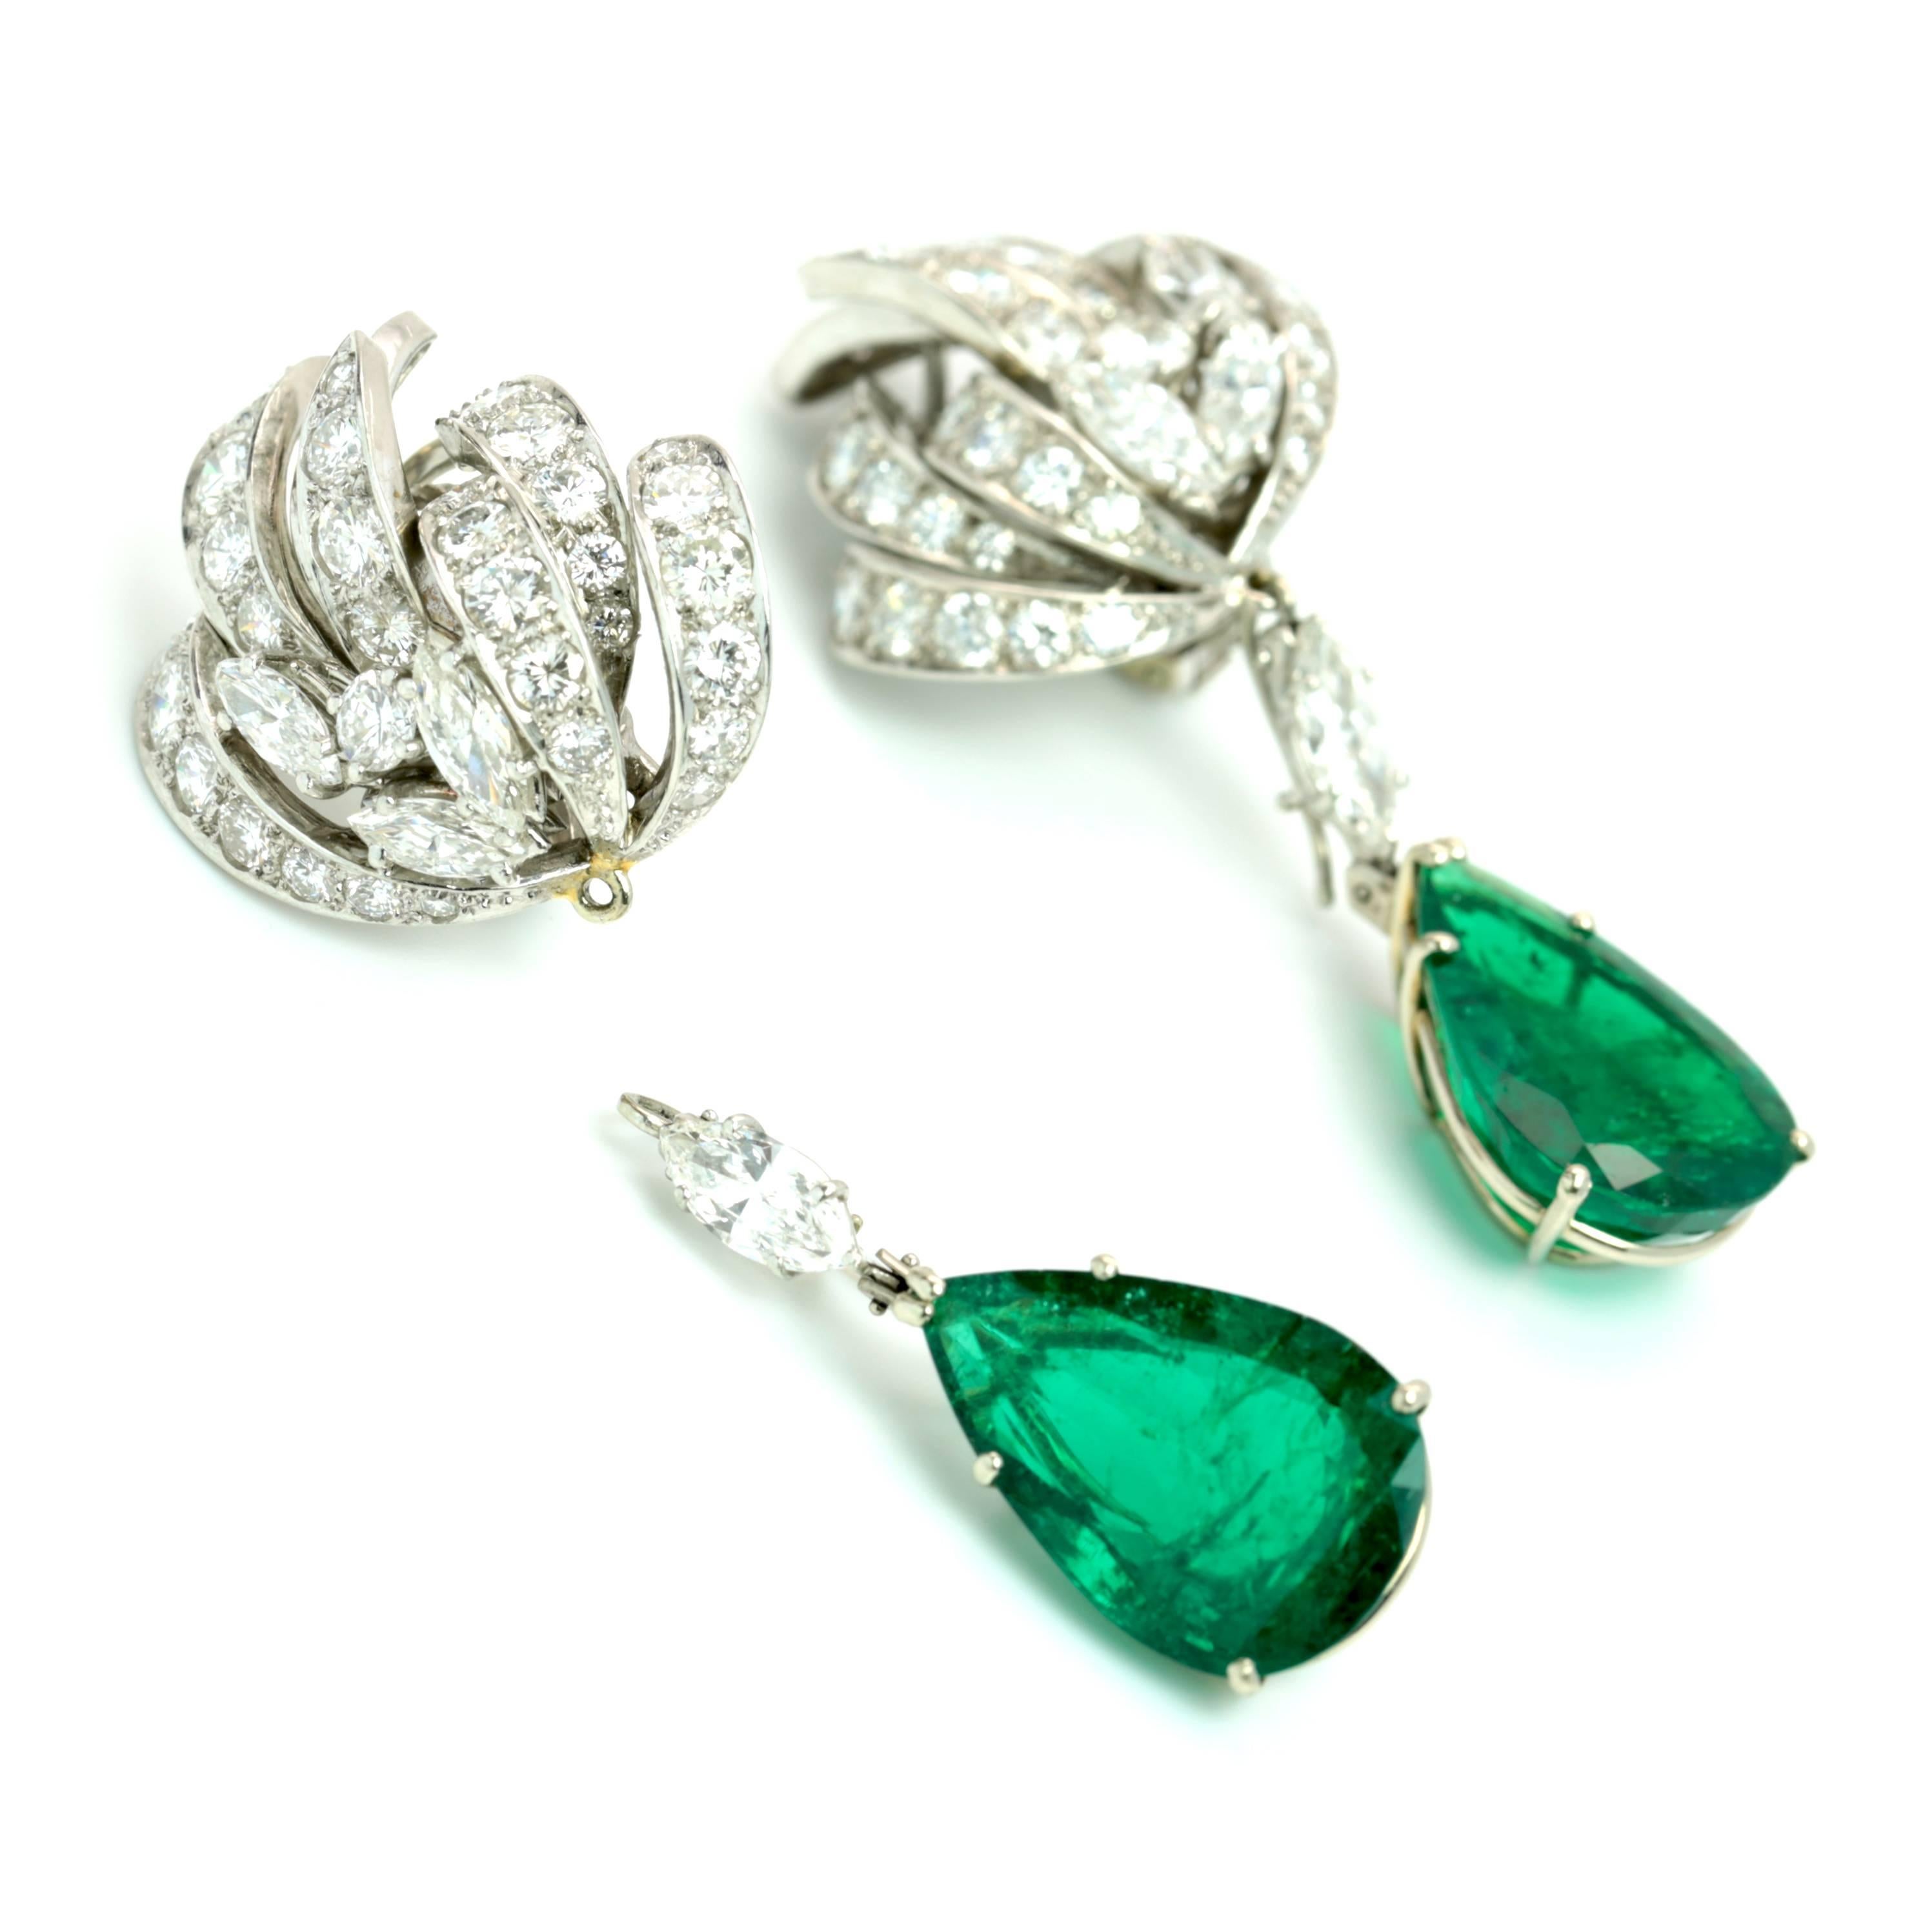 These Magnificent Emerald and Diamond Earrings are set with 2 Pear Shape Emeralds, 9.45 + 9.28 equaling 18.73 that are SSEF Certified (SWISS GEMMOLOGICAL INSTITUTE) Certificate # 77265  Ct. Colombian Emerald Natural Beryl. Platinum Mounting set with